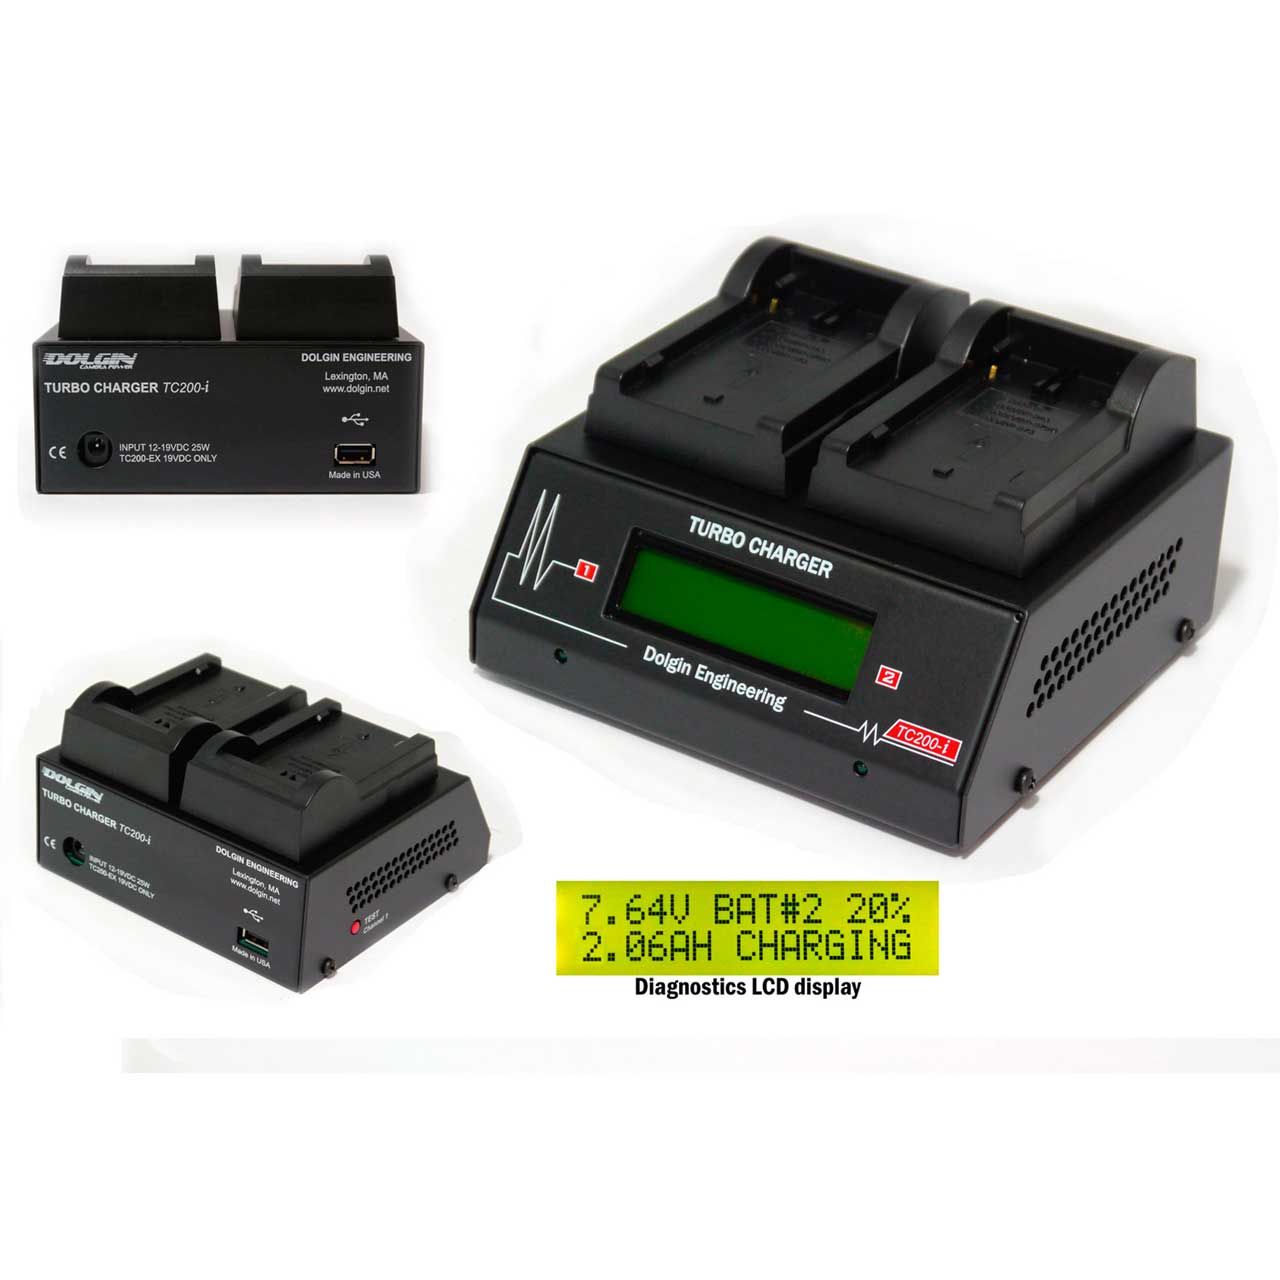 Dolgin Tc0 Can I Two Position Battery Charger For Canon Bp 900 Series